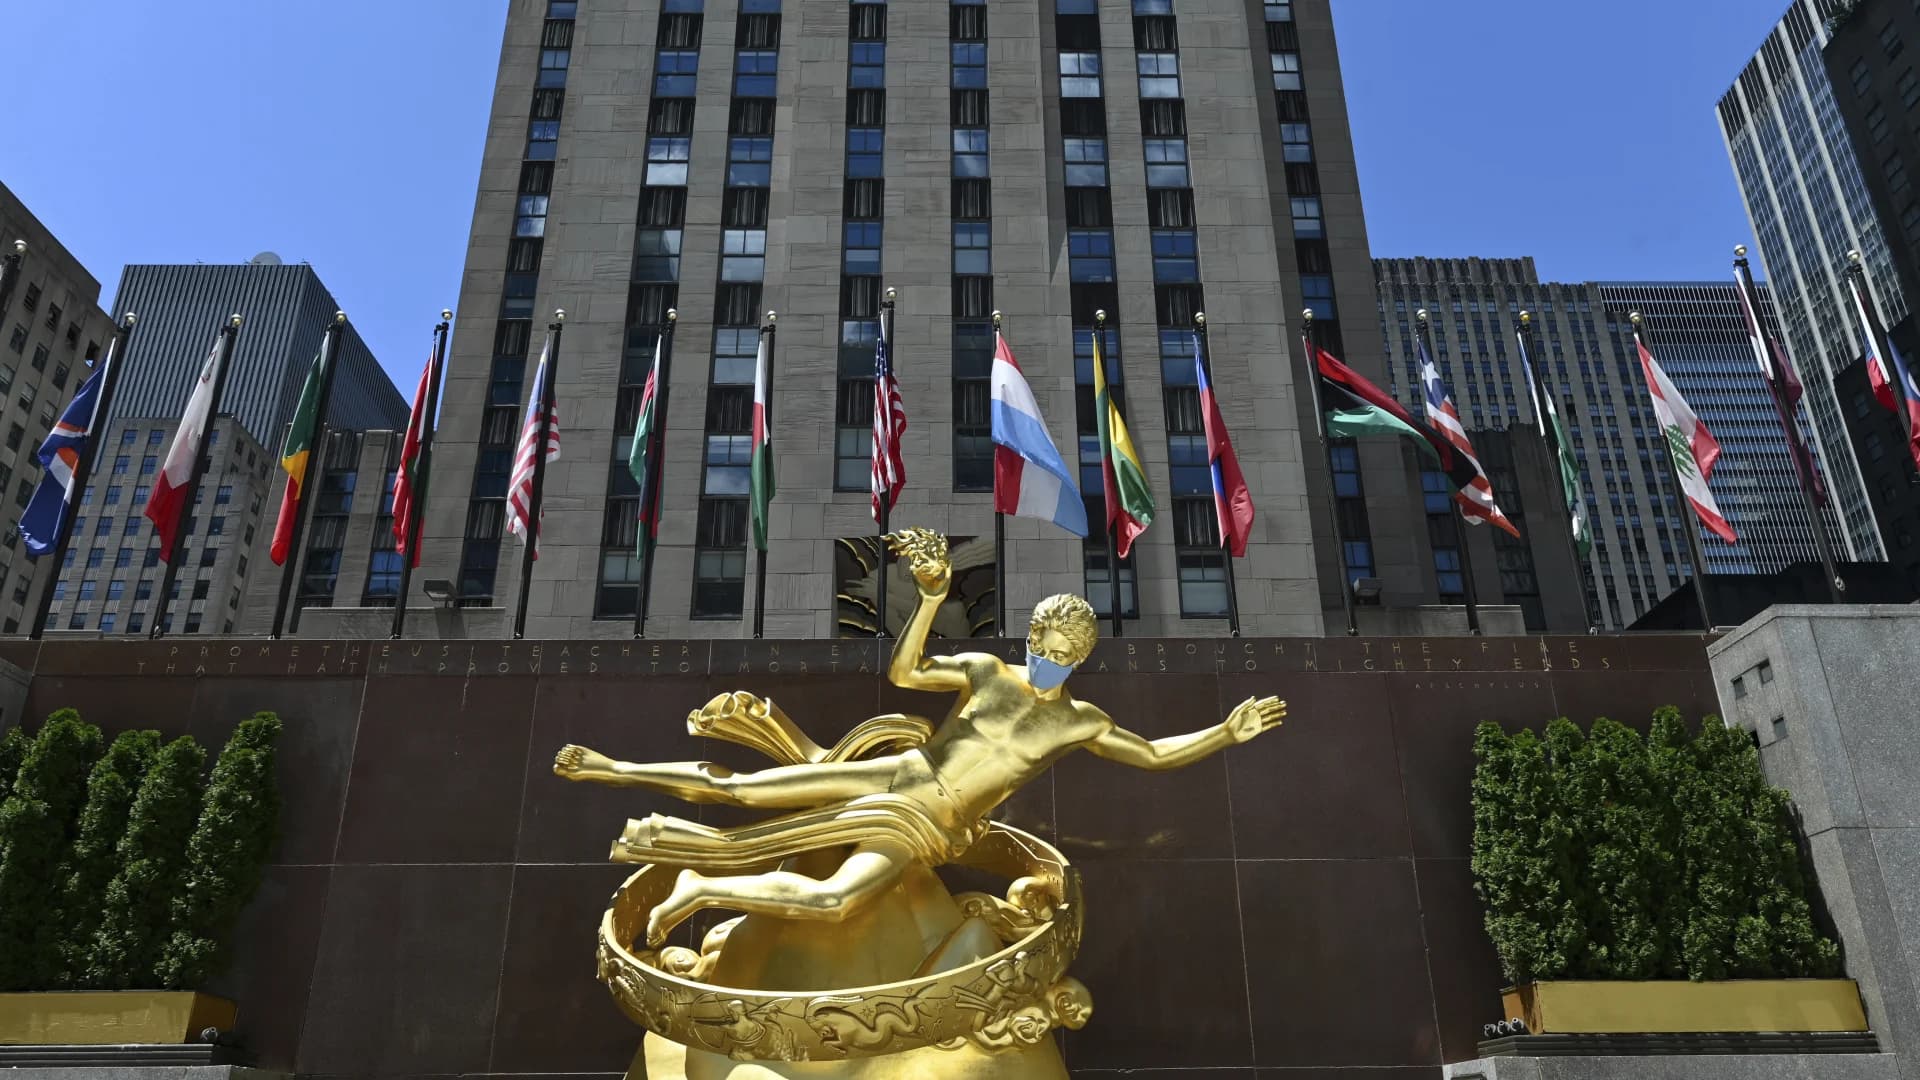 Rockefeller Center opens submissions to host weddings for 5 couples in honor of Pride 